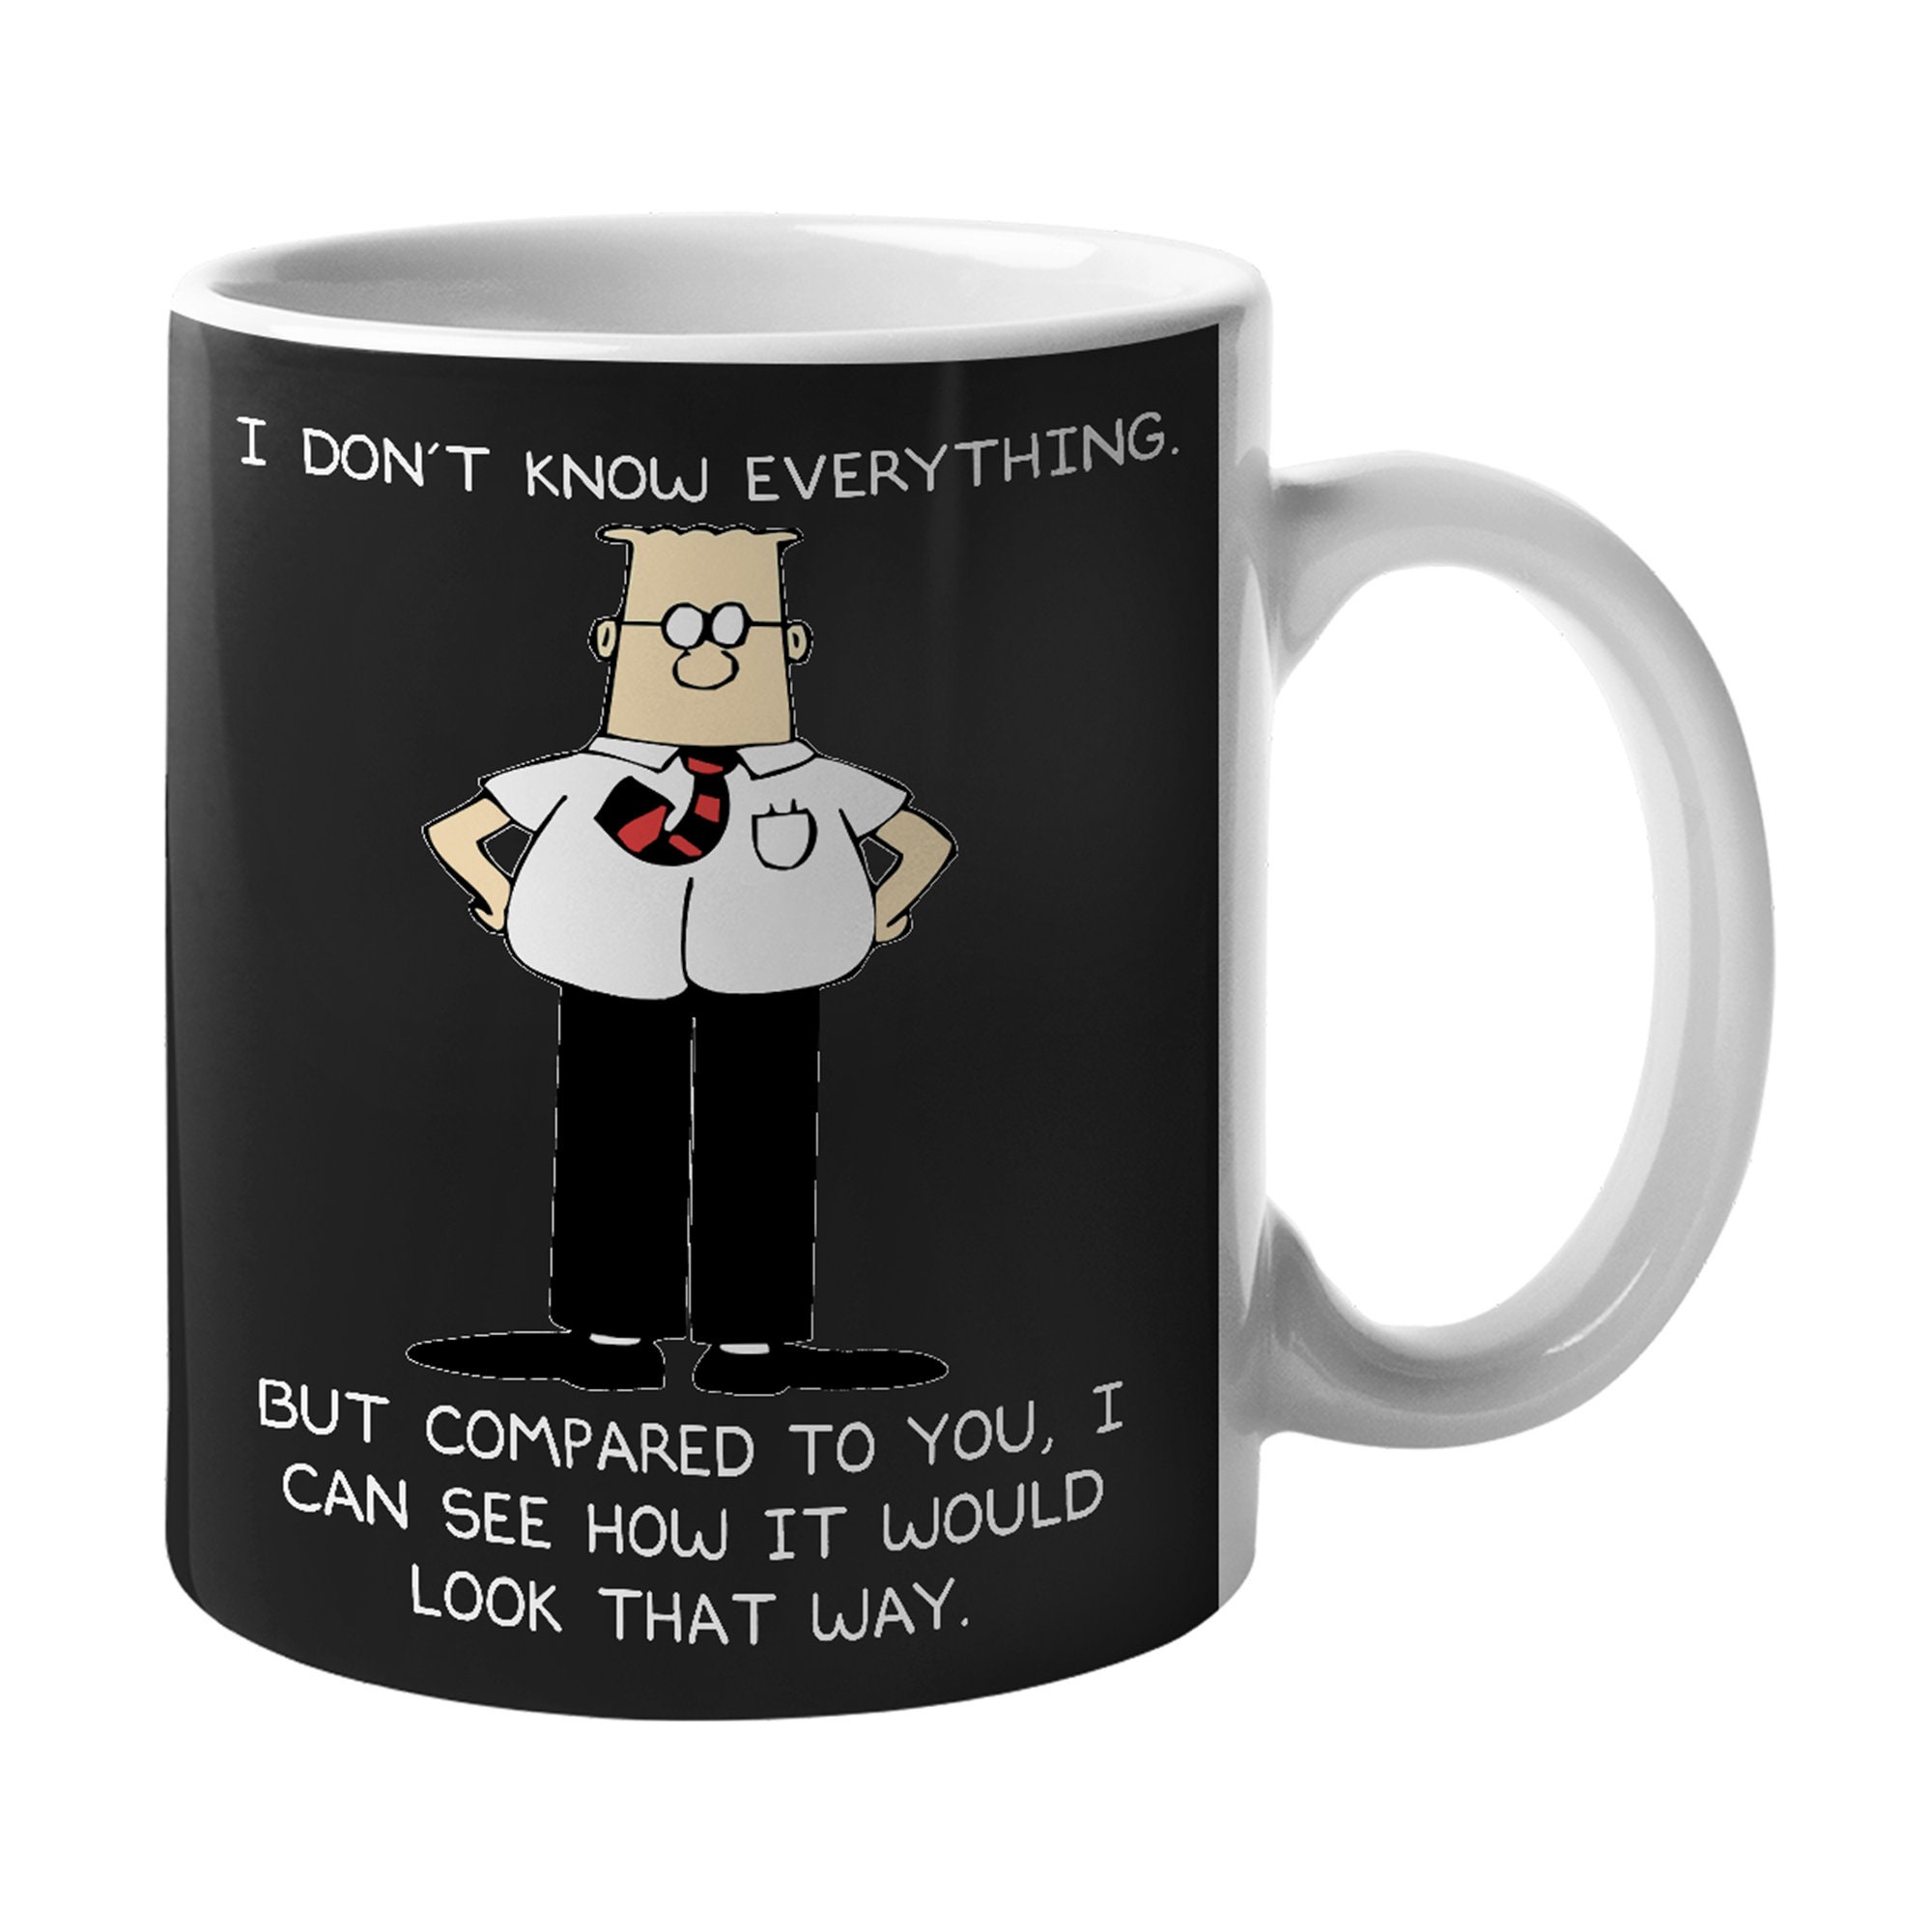 Dilbert Mug I Don't Know Everything Mug but compared to you, i can see how it would look that way Coffee Mug